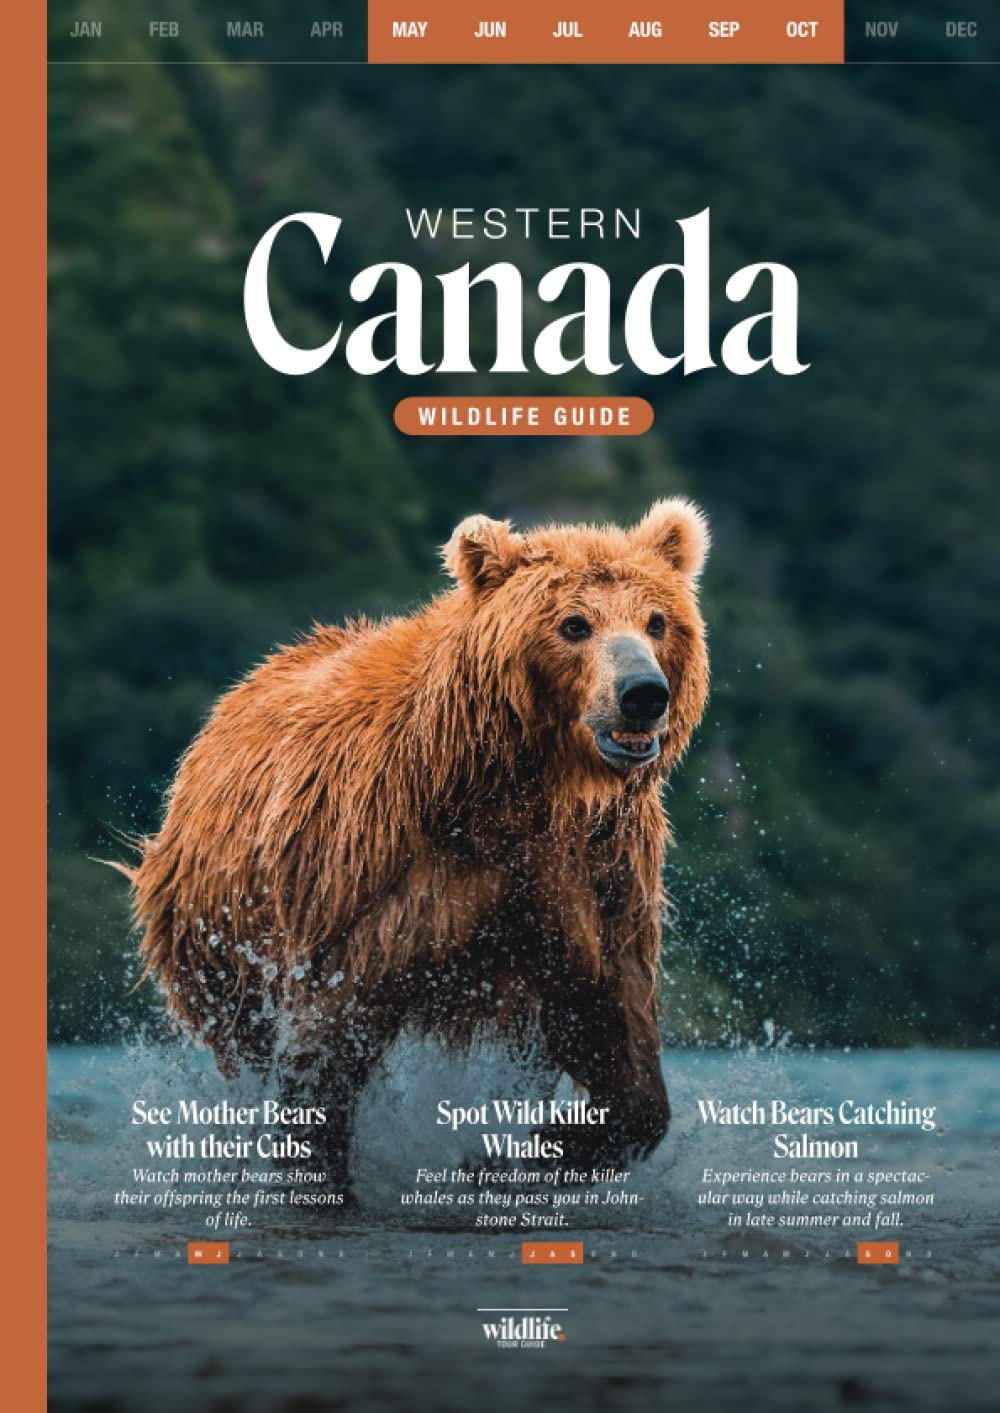 WILDLIFE TOUR GUIDE Travel Guide Western Canada: The most beautiful wildlife regions for self-drivers with insider tips for wildlife viewing and ... between May and October (English Edition)